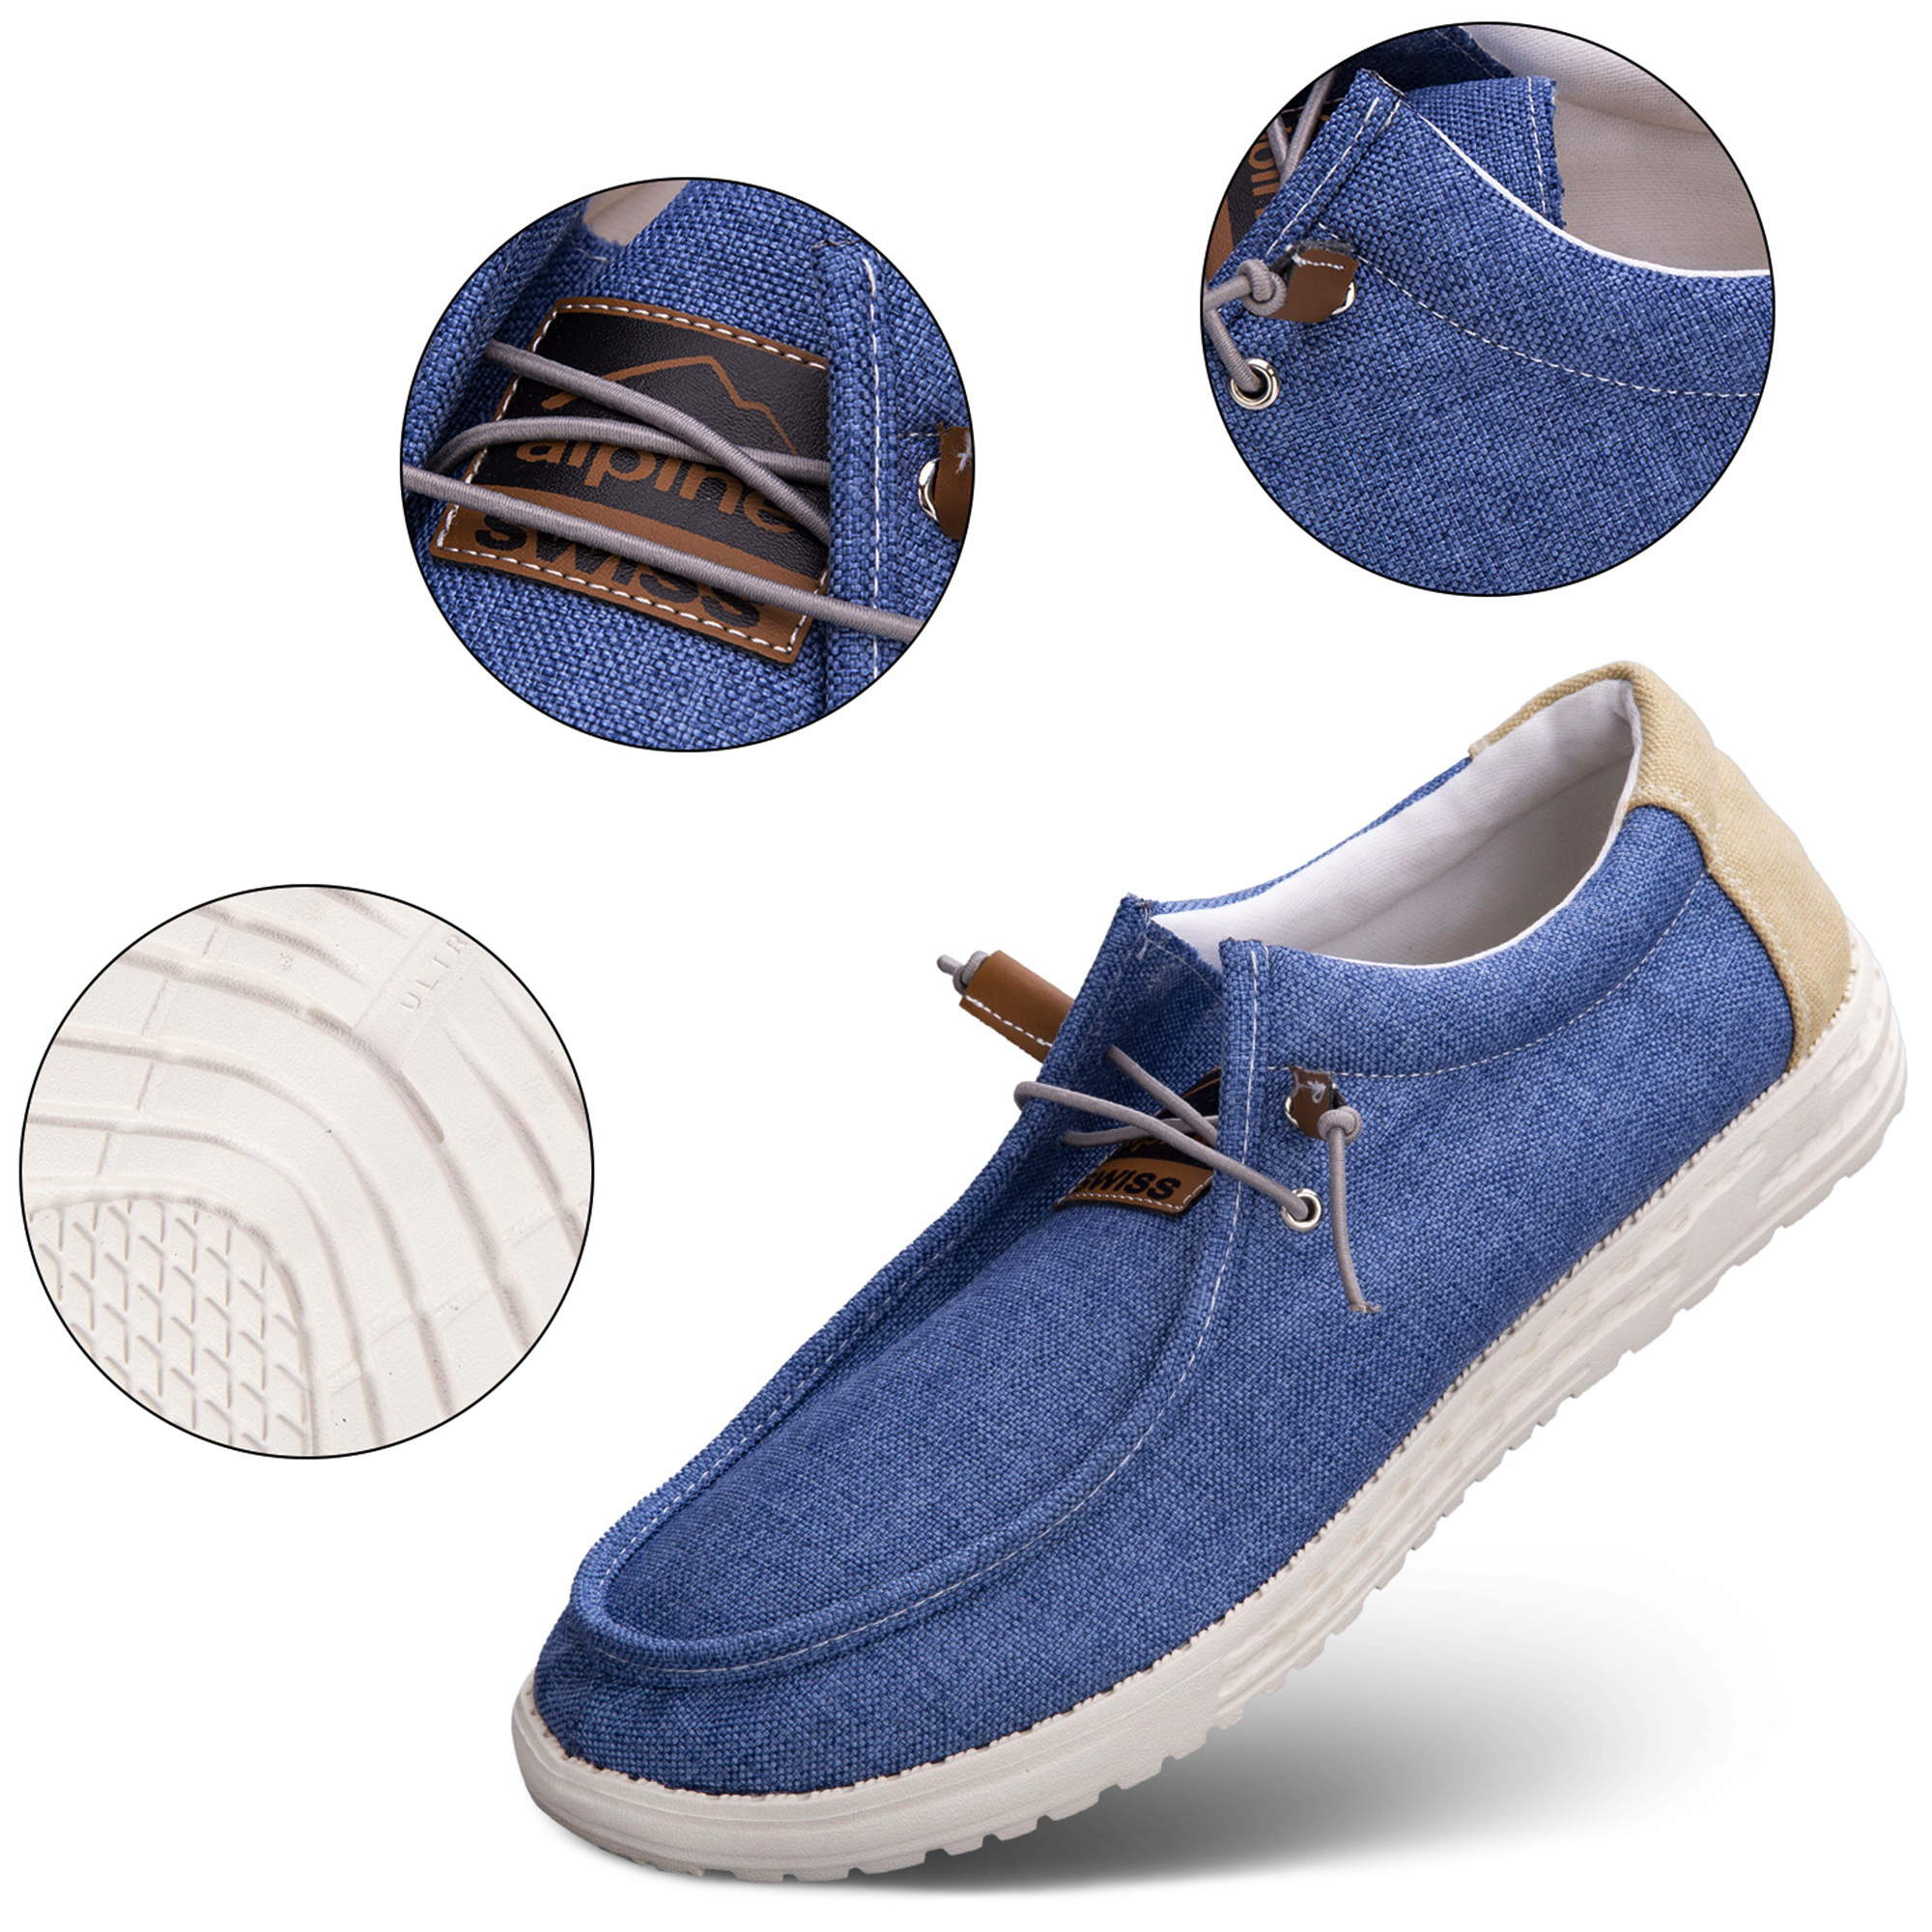 Alpine Swiss Flynn Mens Boat Shoes Casual Slip On Moccasin Loafers Sailing Deck Shoe So Light It Floats On Water - image 3 of 7